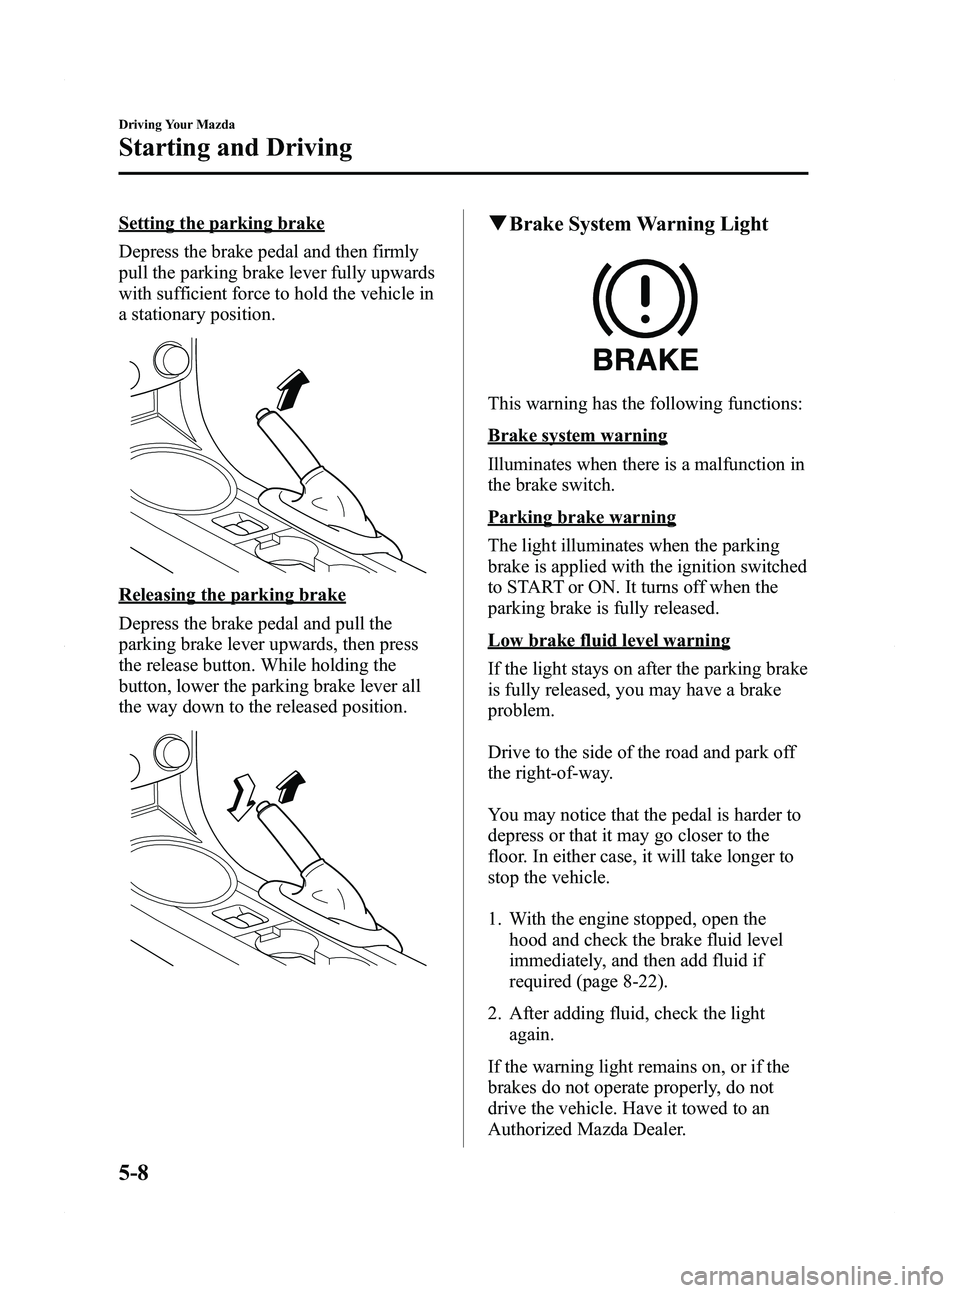 MAZDA MODEL MX-5 MIATA 2011  Owners Manual Black plate (162,1)
Setting the parking brake
Depress the brake pedal and then firmly
pull the parking brake lever fully upwards
with sufficient force to hold the vehicle in
a stationary position.
Rel